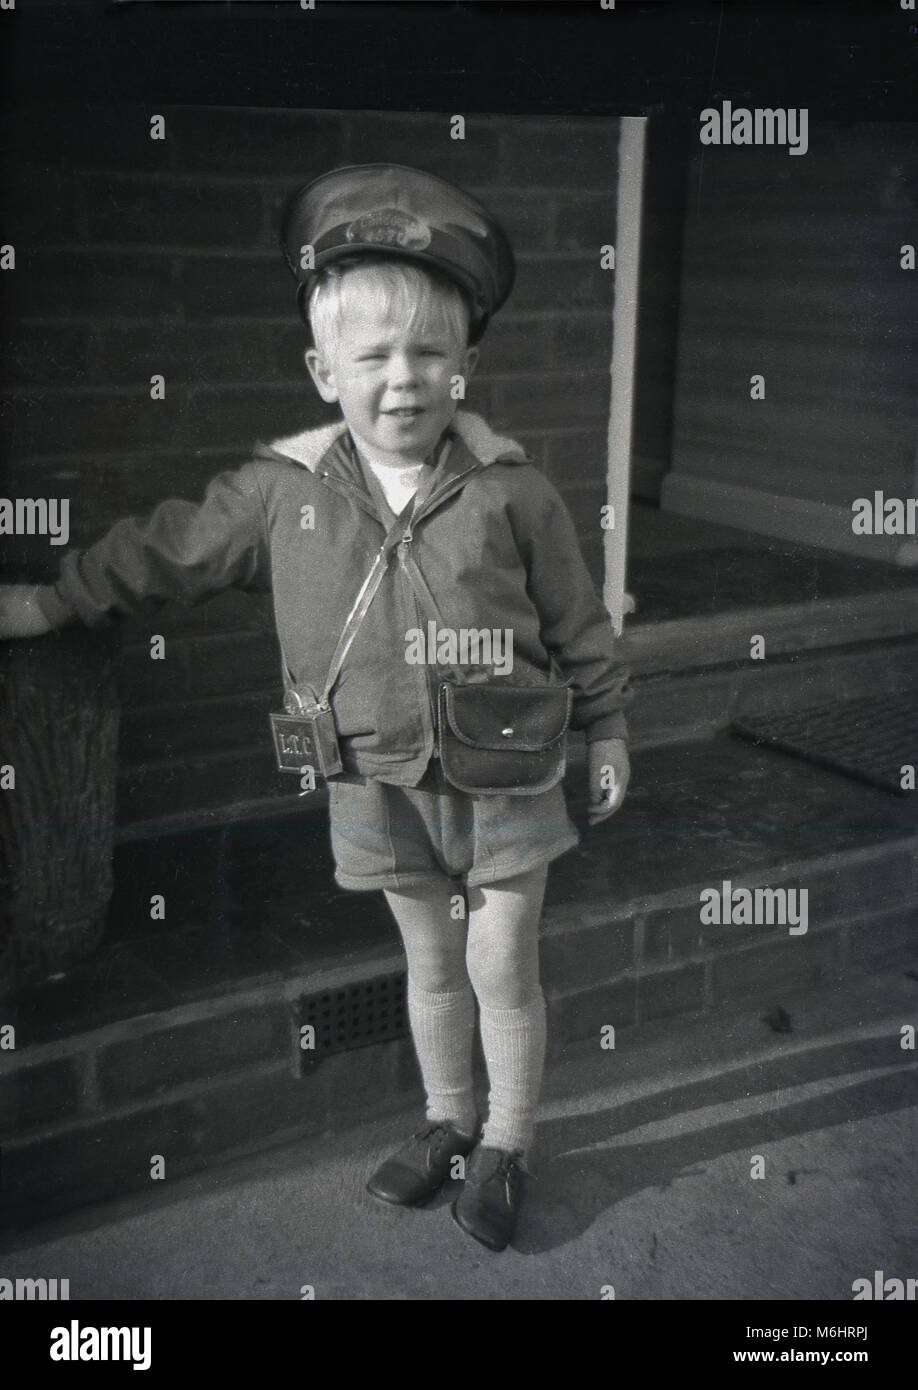 1960s, historical, young blond English boy standing outside wearing a bus conductor's set or outfit of cap, money bag and metal ticket punch, a popular child' dressing-up costume of this era. Stock Photo